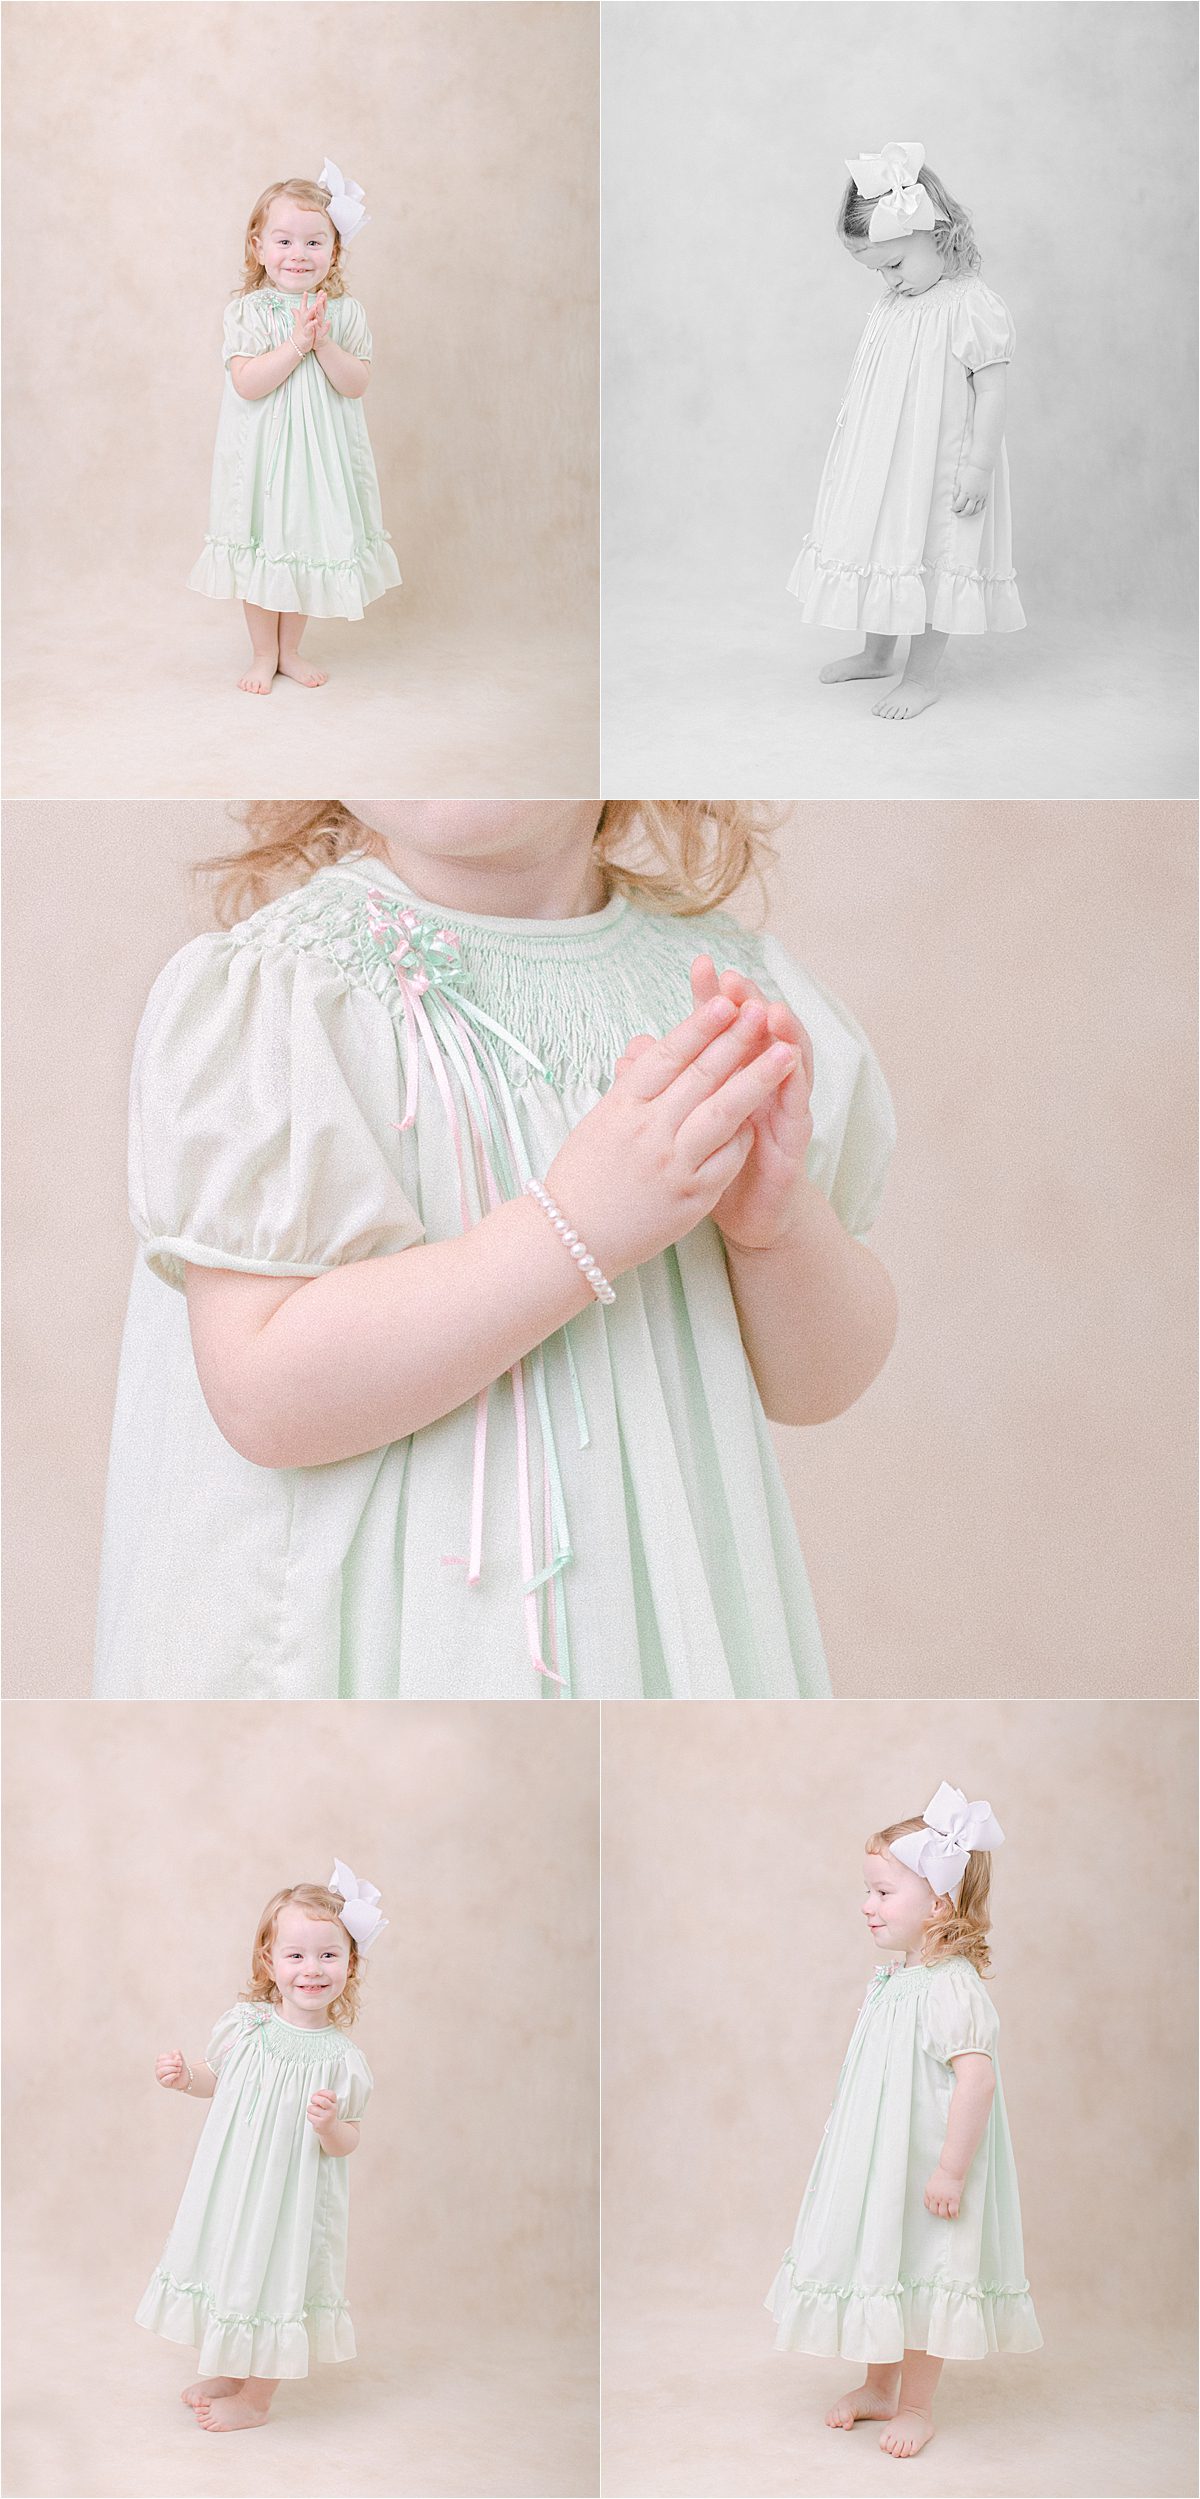 Heirloom toddler photography in studio near Athens, GA.